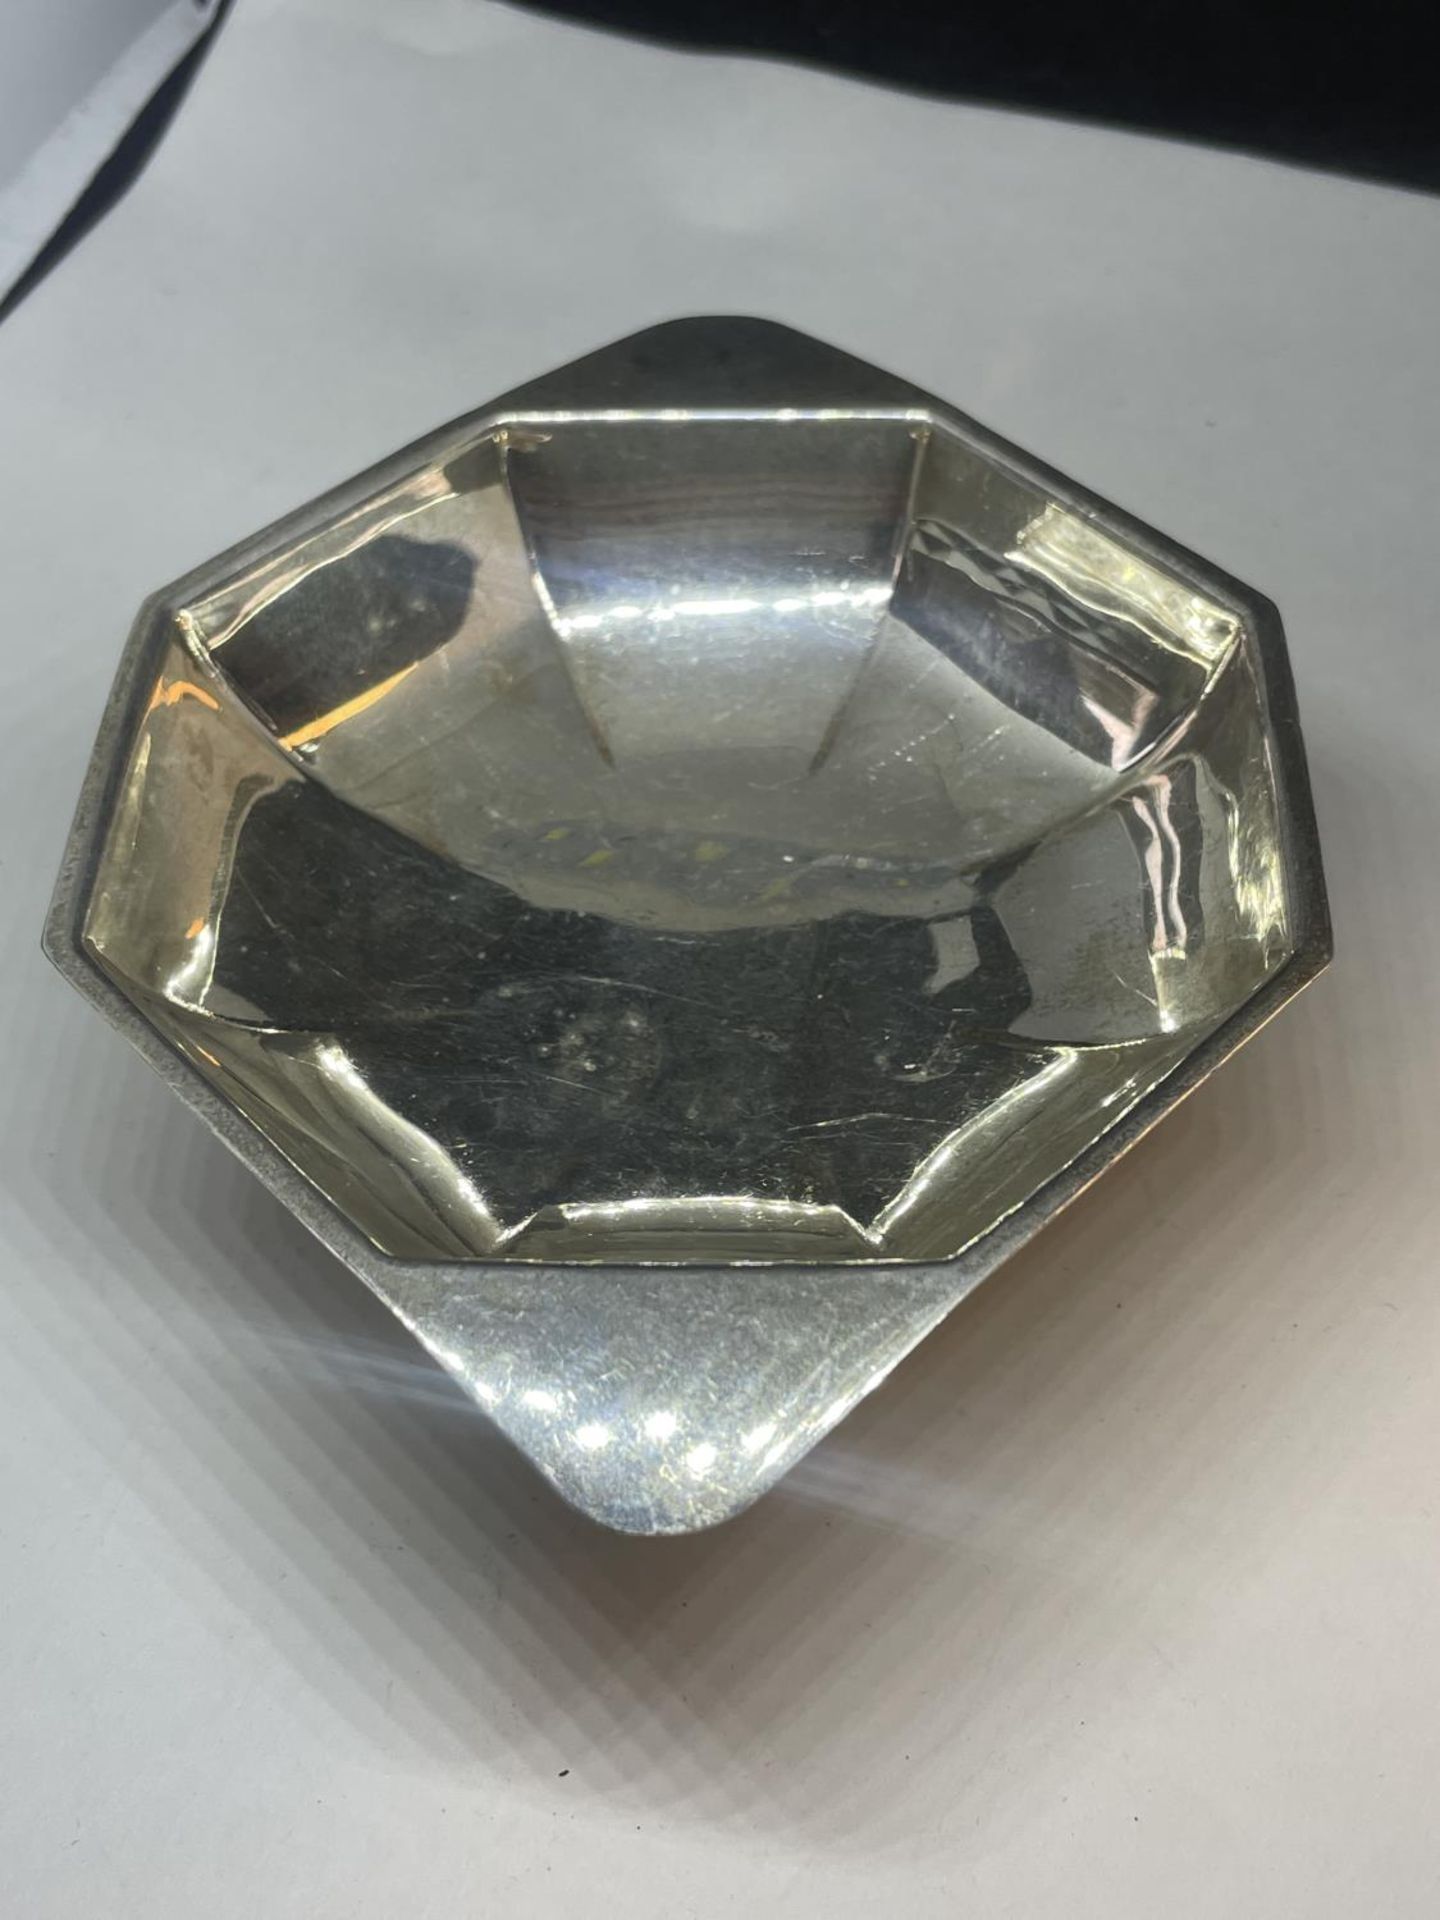 A HALLMARKED LONDON SILVER OCTAGONAL FOOTED DISH GROSS WEIGHT 107.5 GRAMS - Image 4 of 4